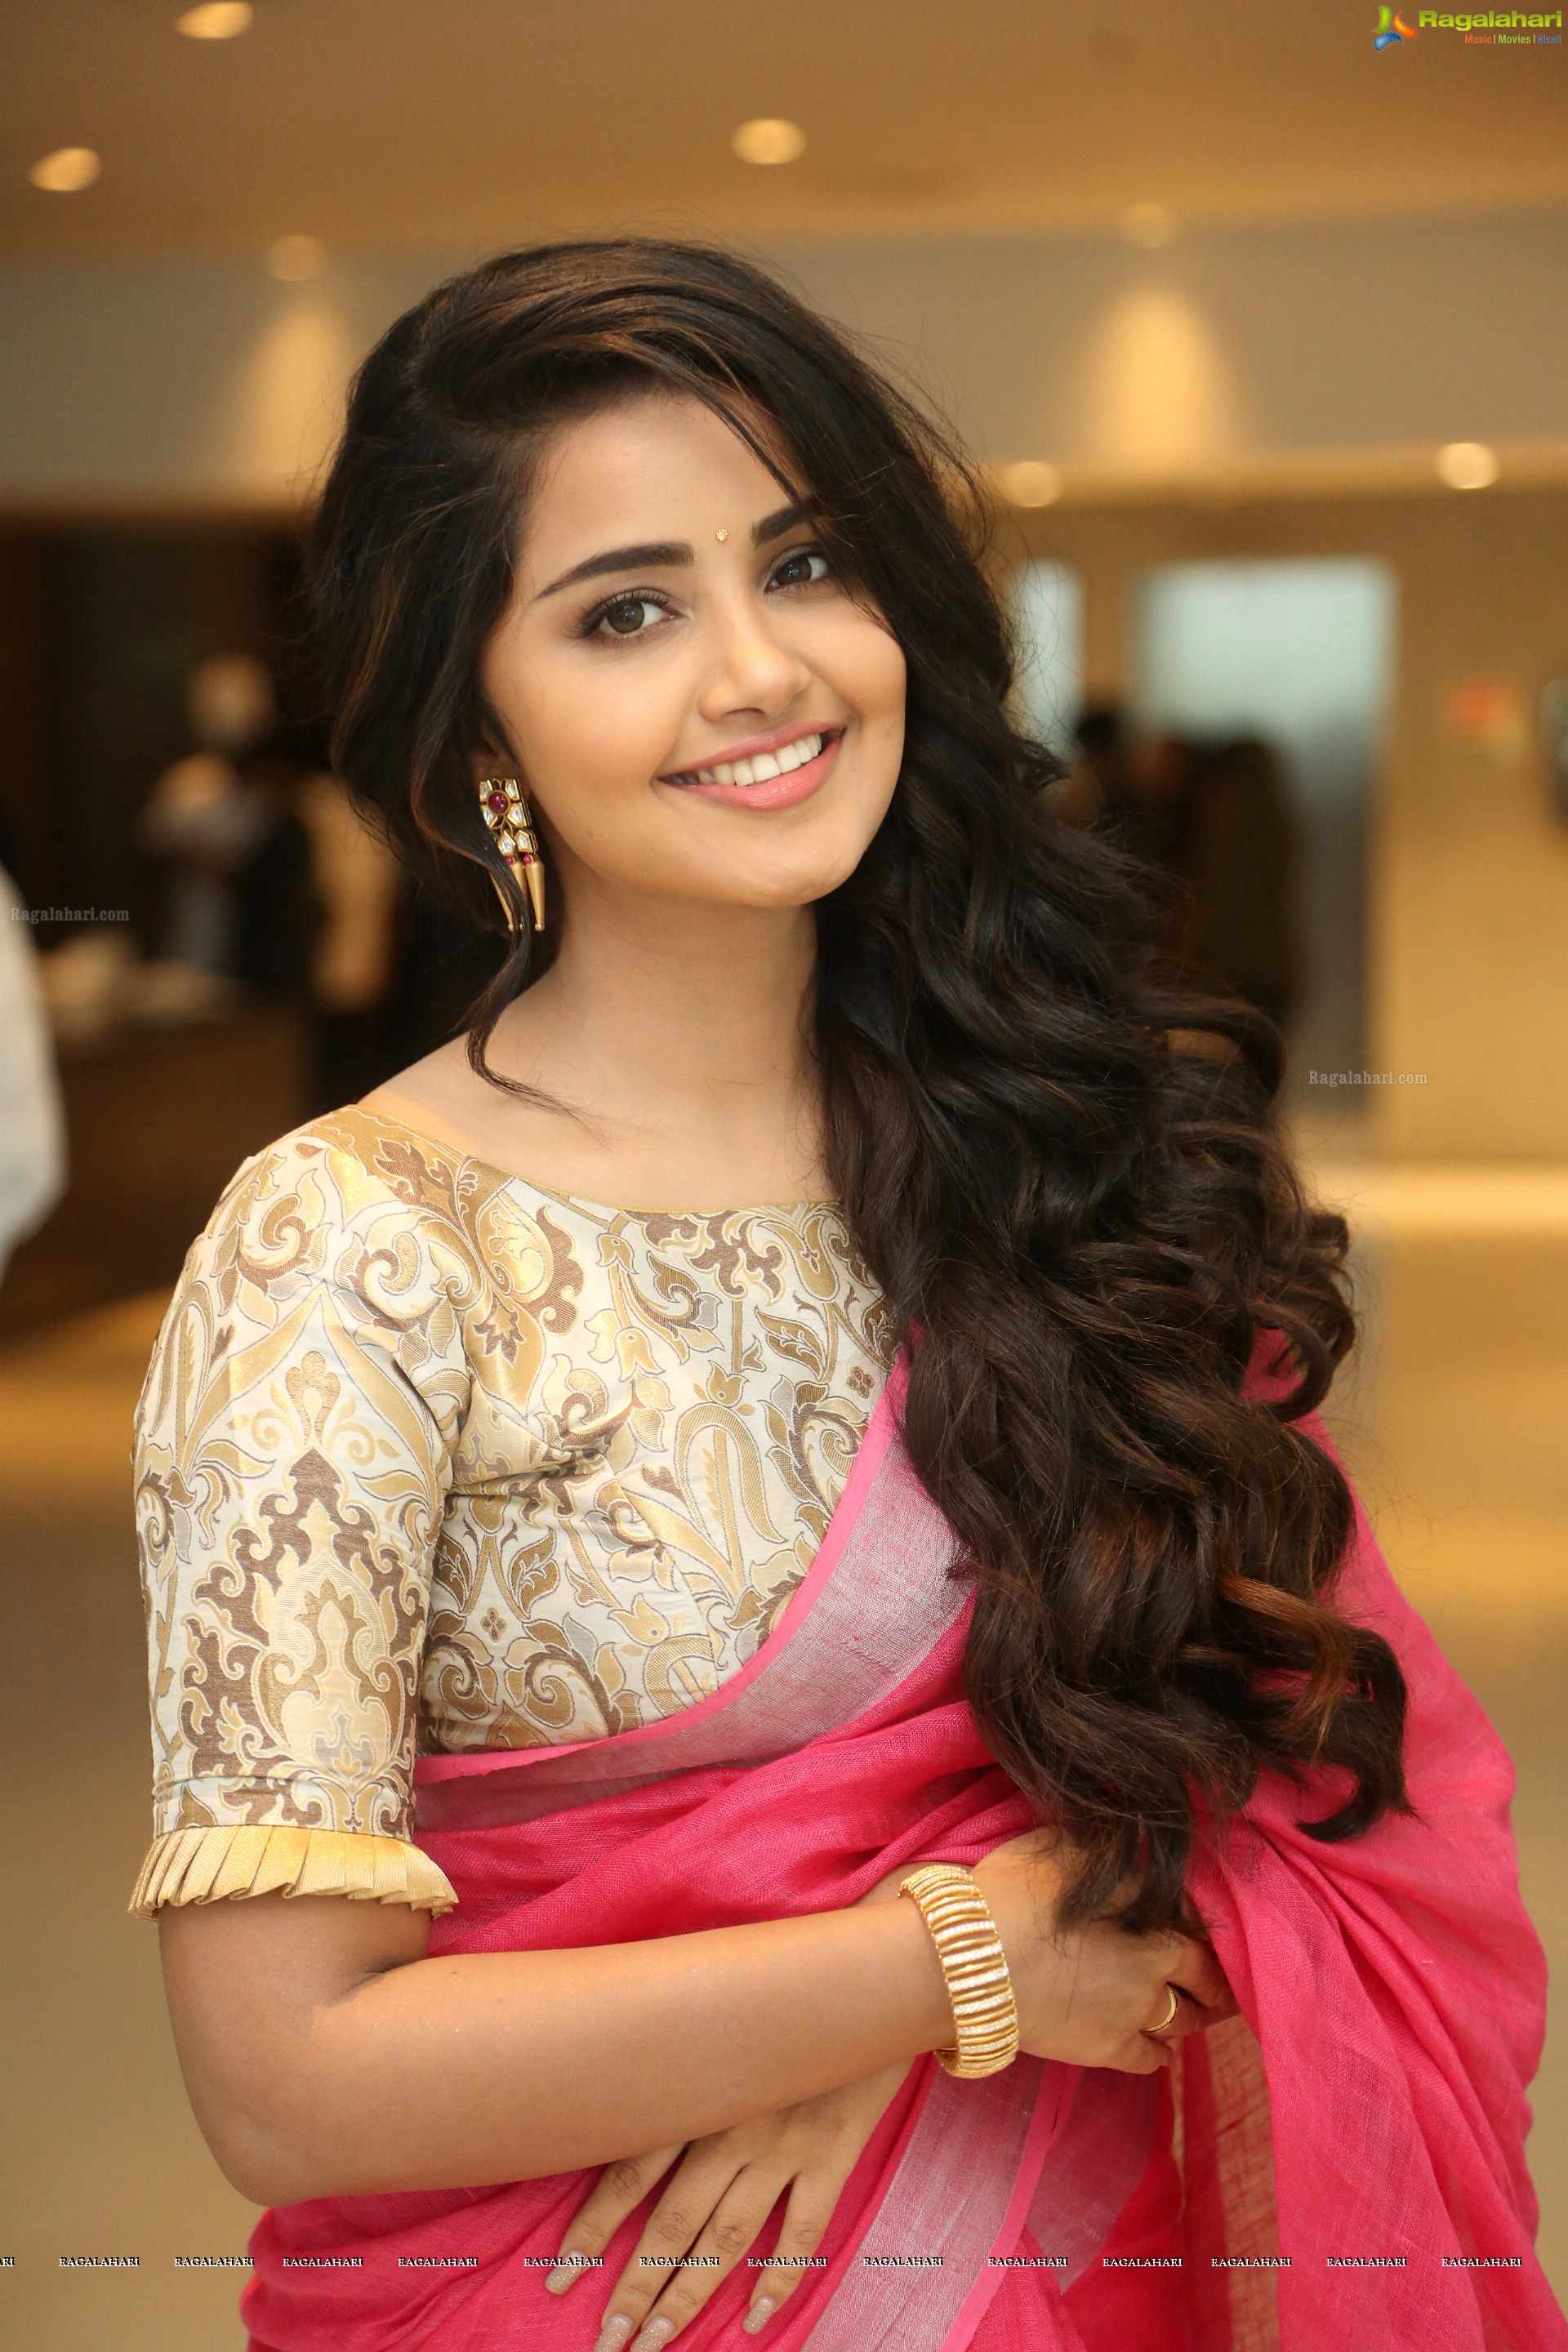 Anupama Parameswaran Anupama Parameswaran Anupama Parameswaran - Full Hd Anupama Parameswaran , HD Wallpaper & Backgrounds